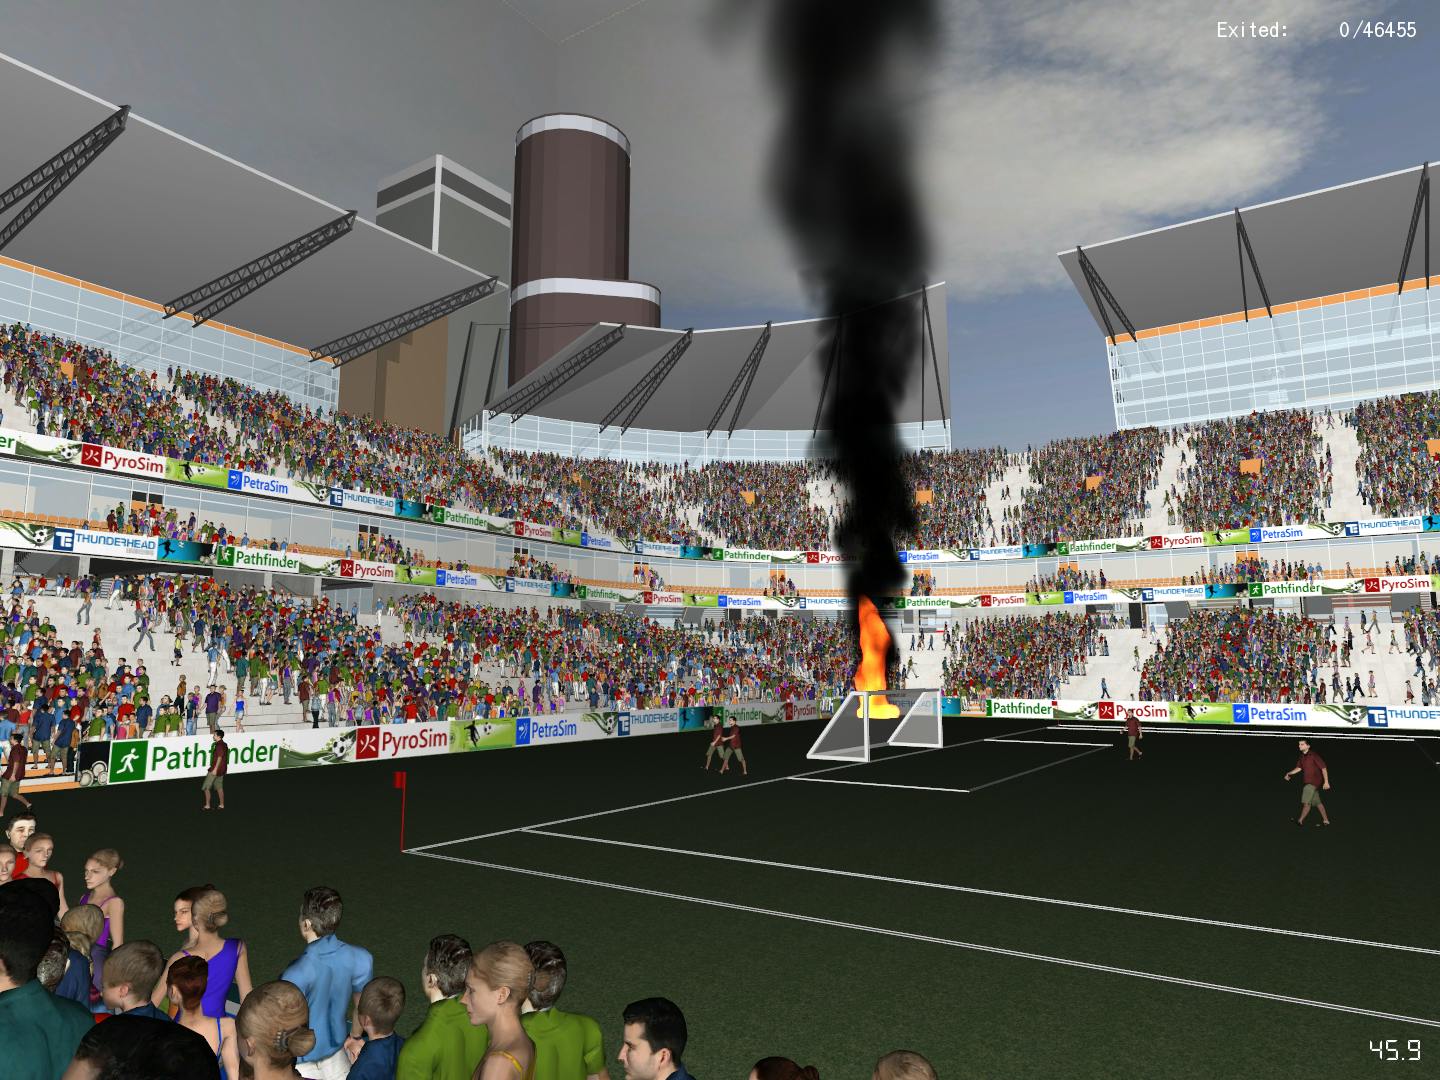 Stadium Model with FDS Fire and Pathfinder Occupants.